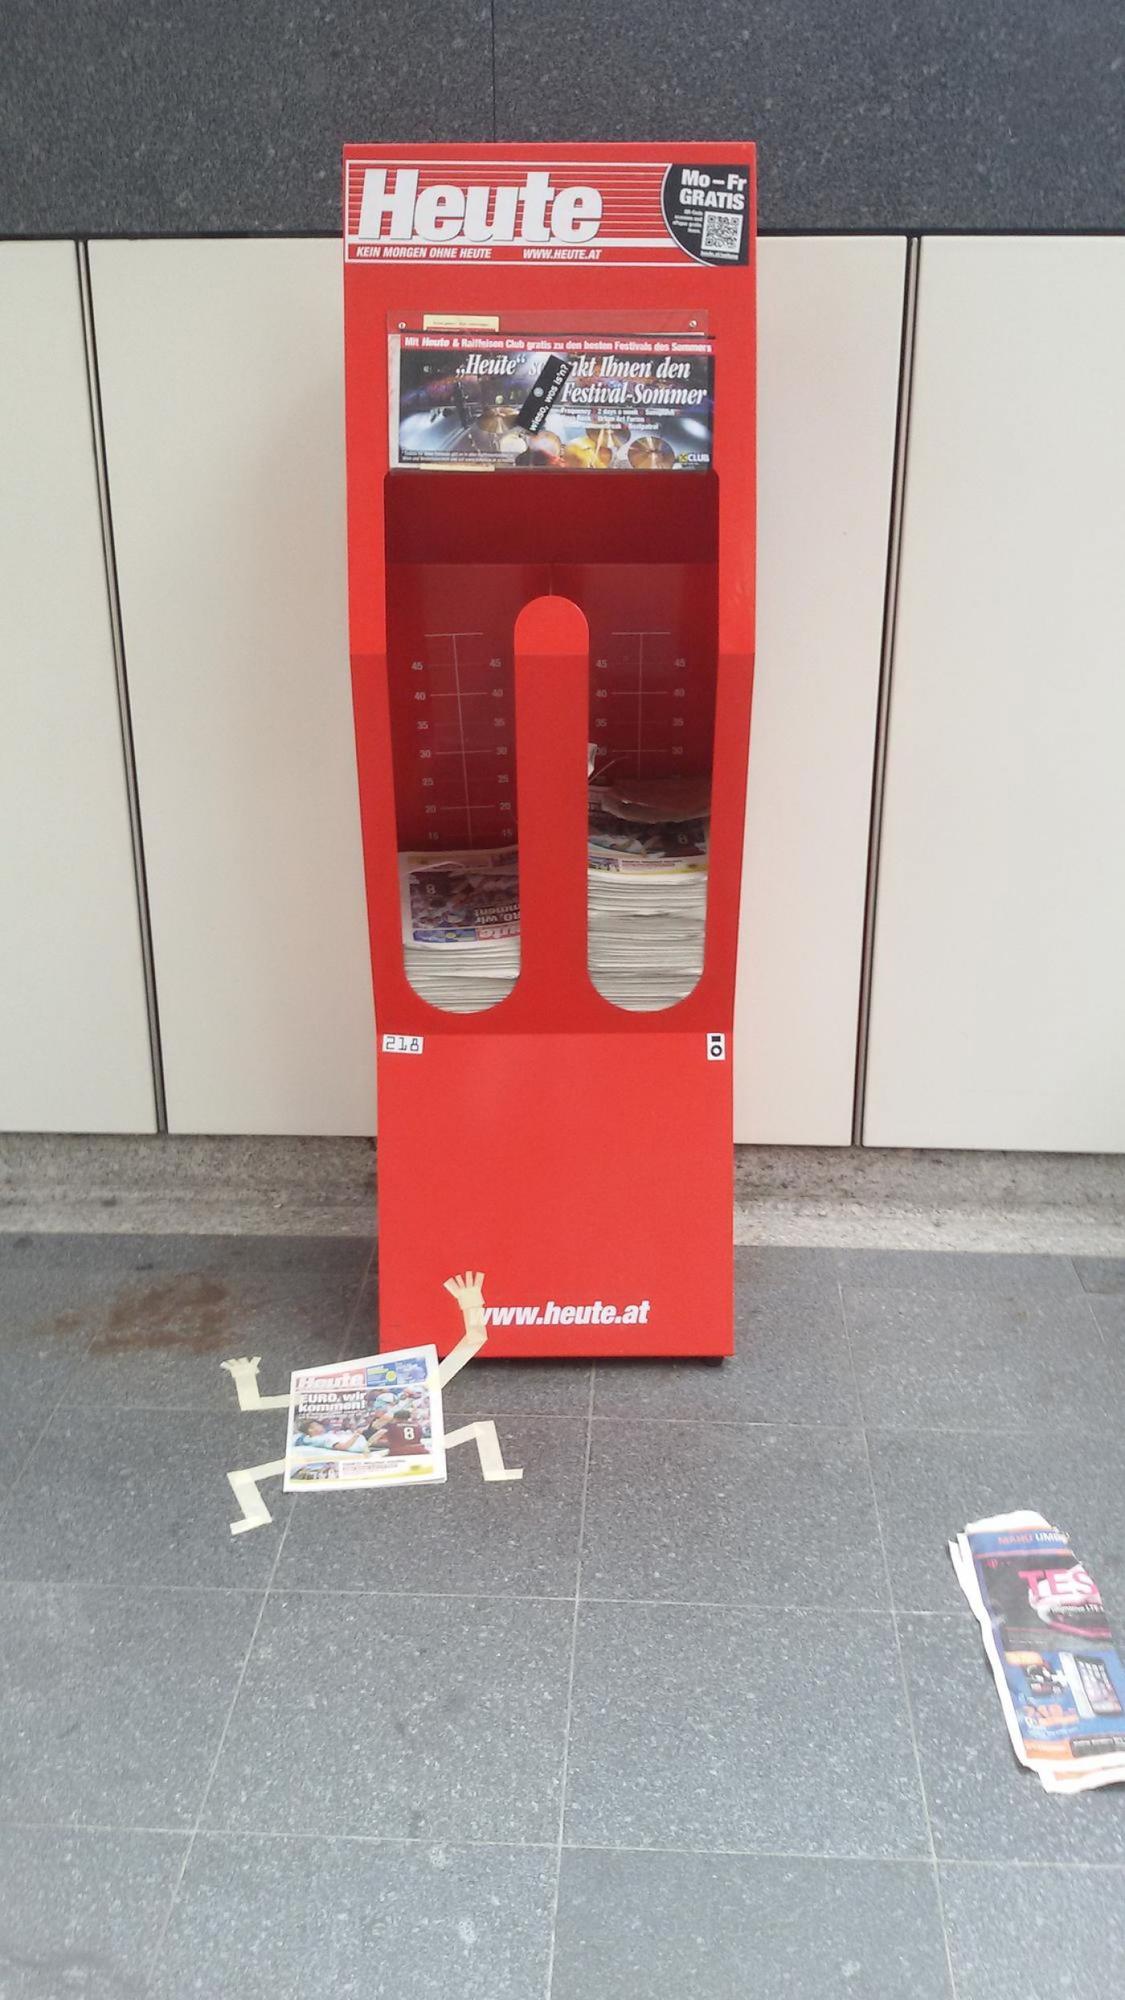 Newspaper stand in metro station